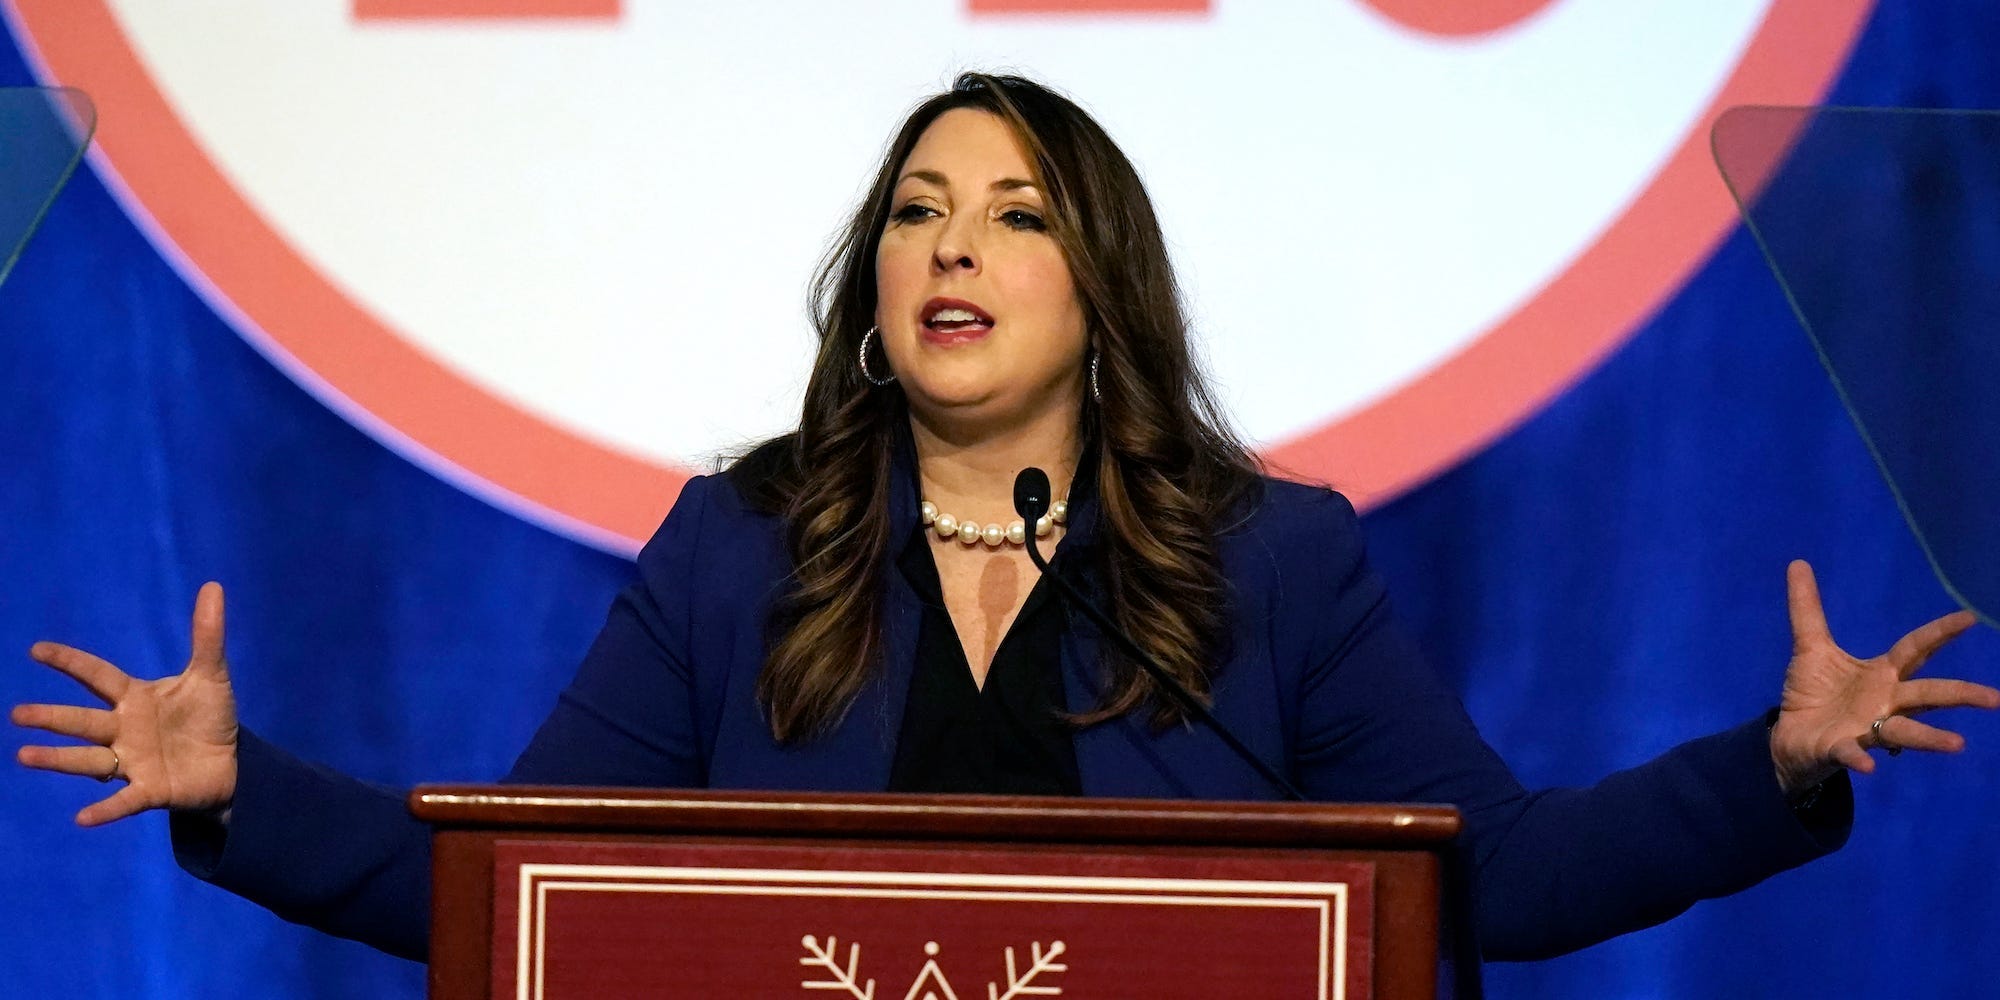 Ronna McDaniel, the GOP chairwoman, speaks during the Republican National Committee winter meeting Friday, Feb. 4, 2022, in Salt Lake City.